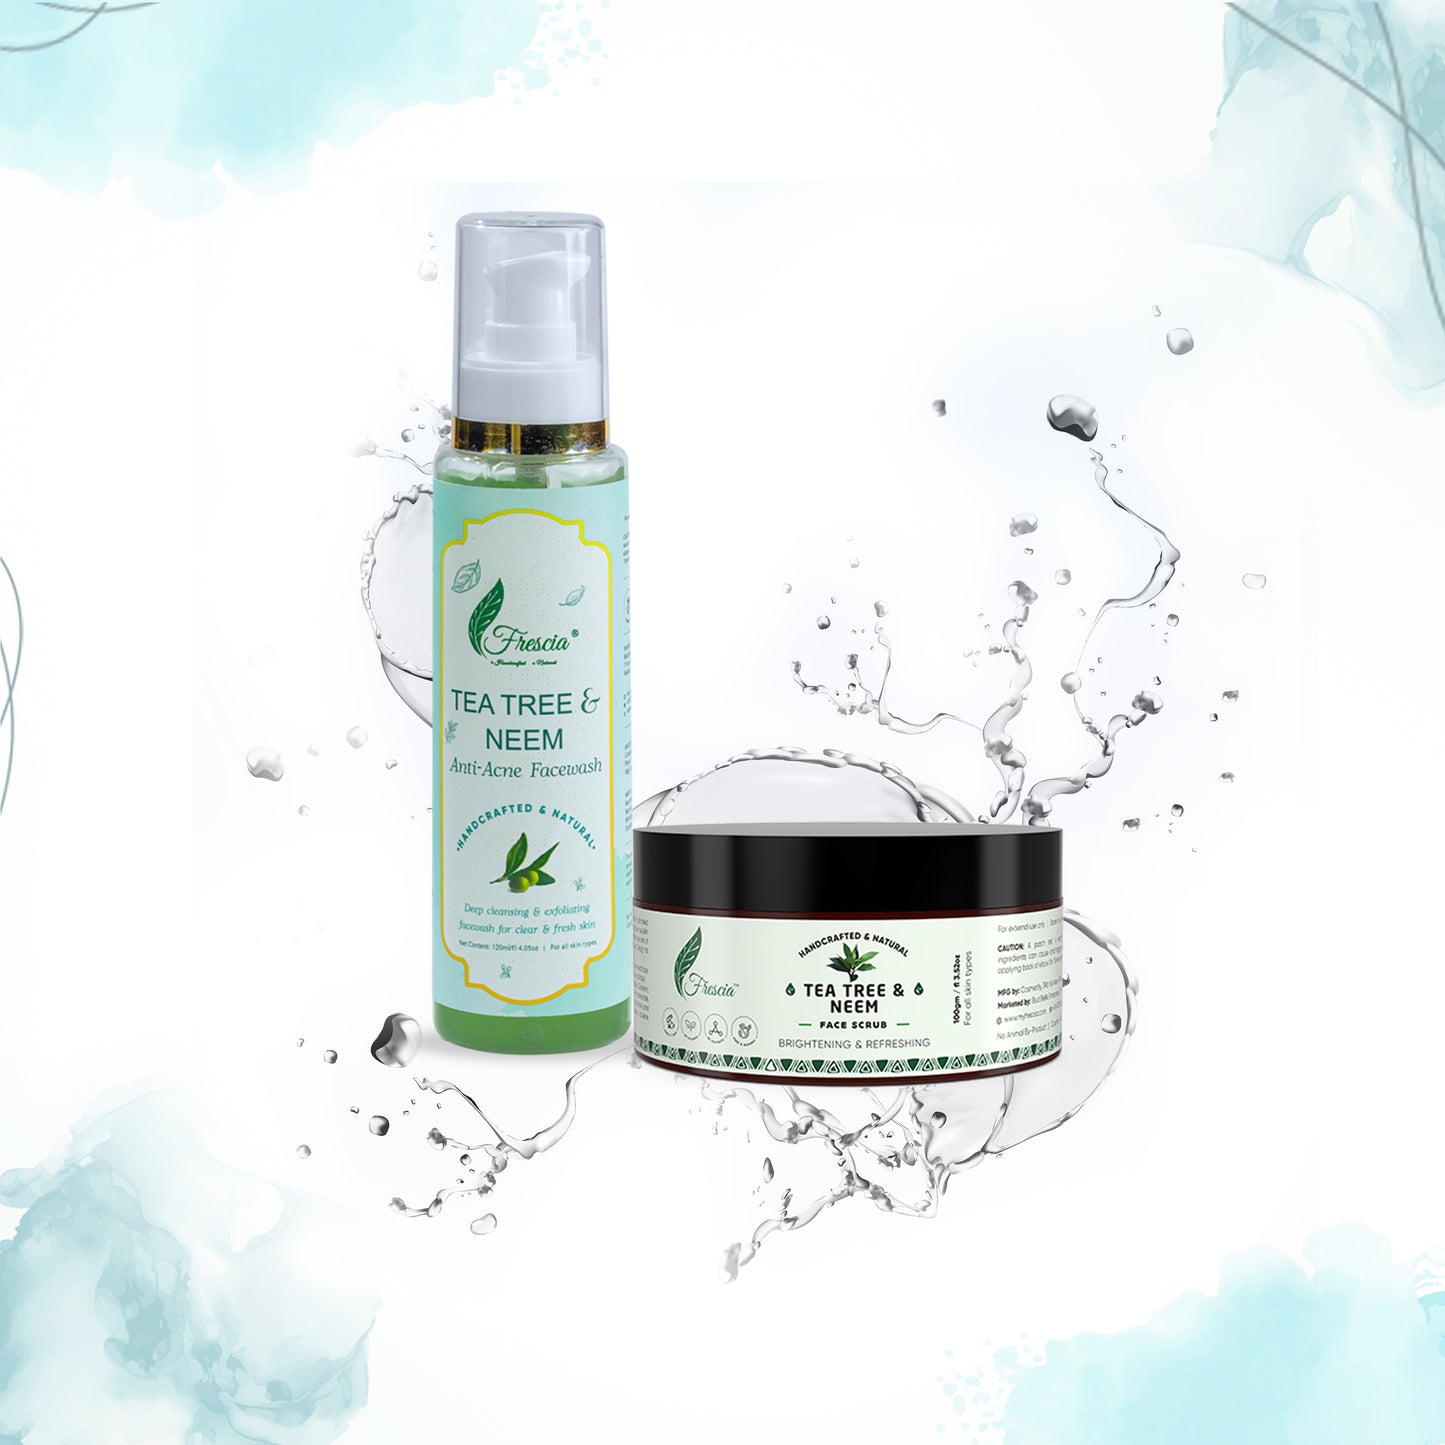 Tea Tree and Neem Cleansers Combo - 2 items